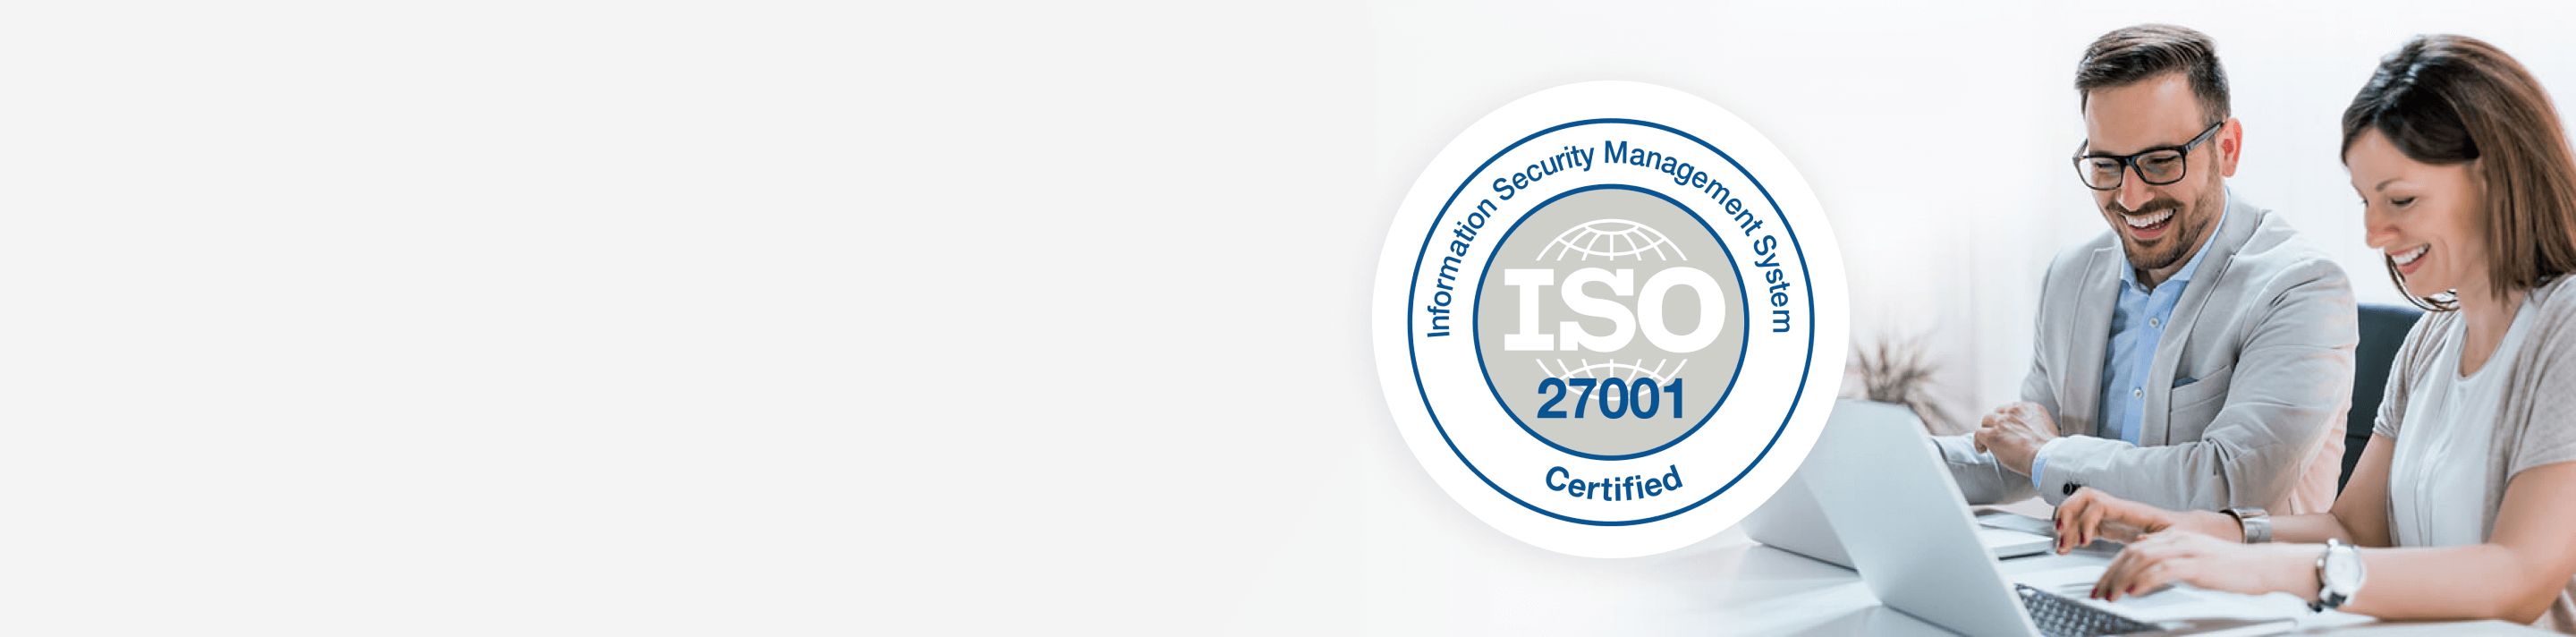 Synergetica is ISO 27001 Certificated